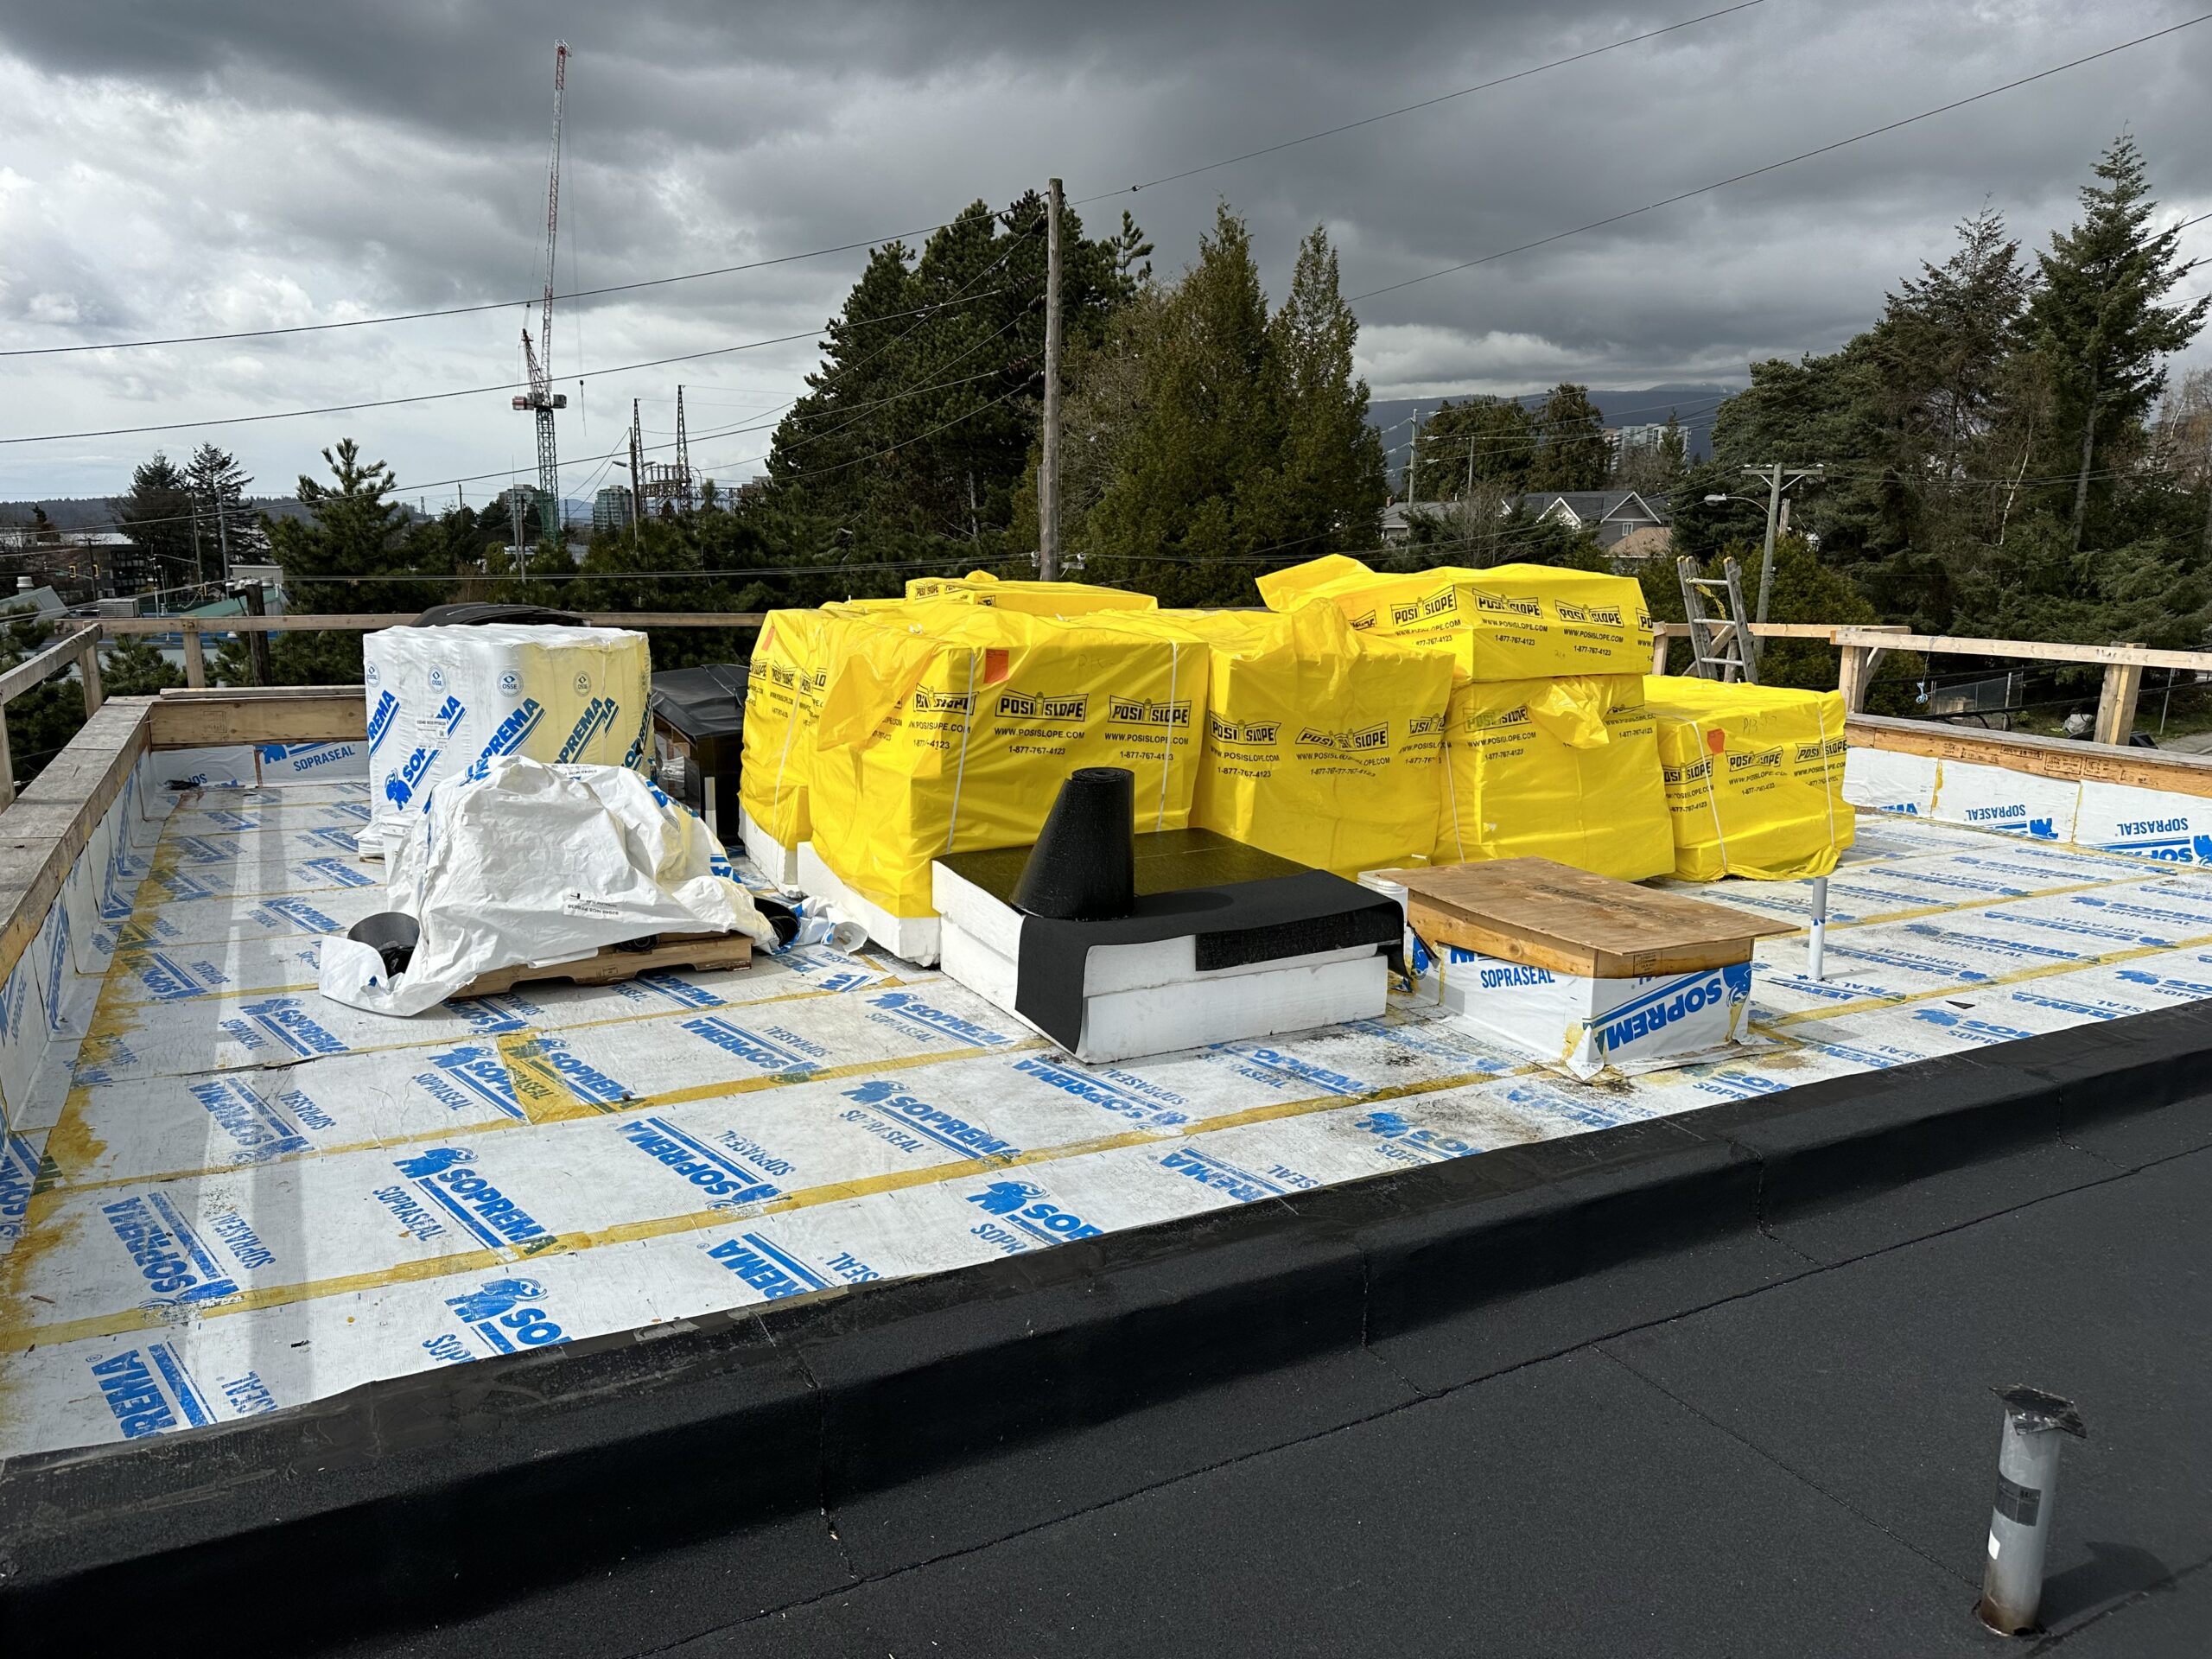 Posi Slope BUR Roofing systems